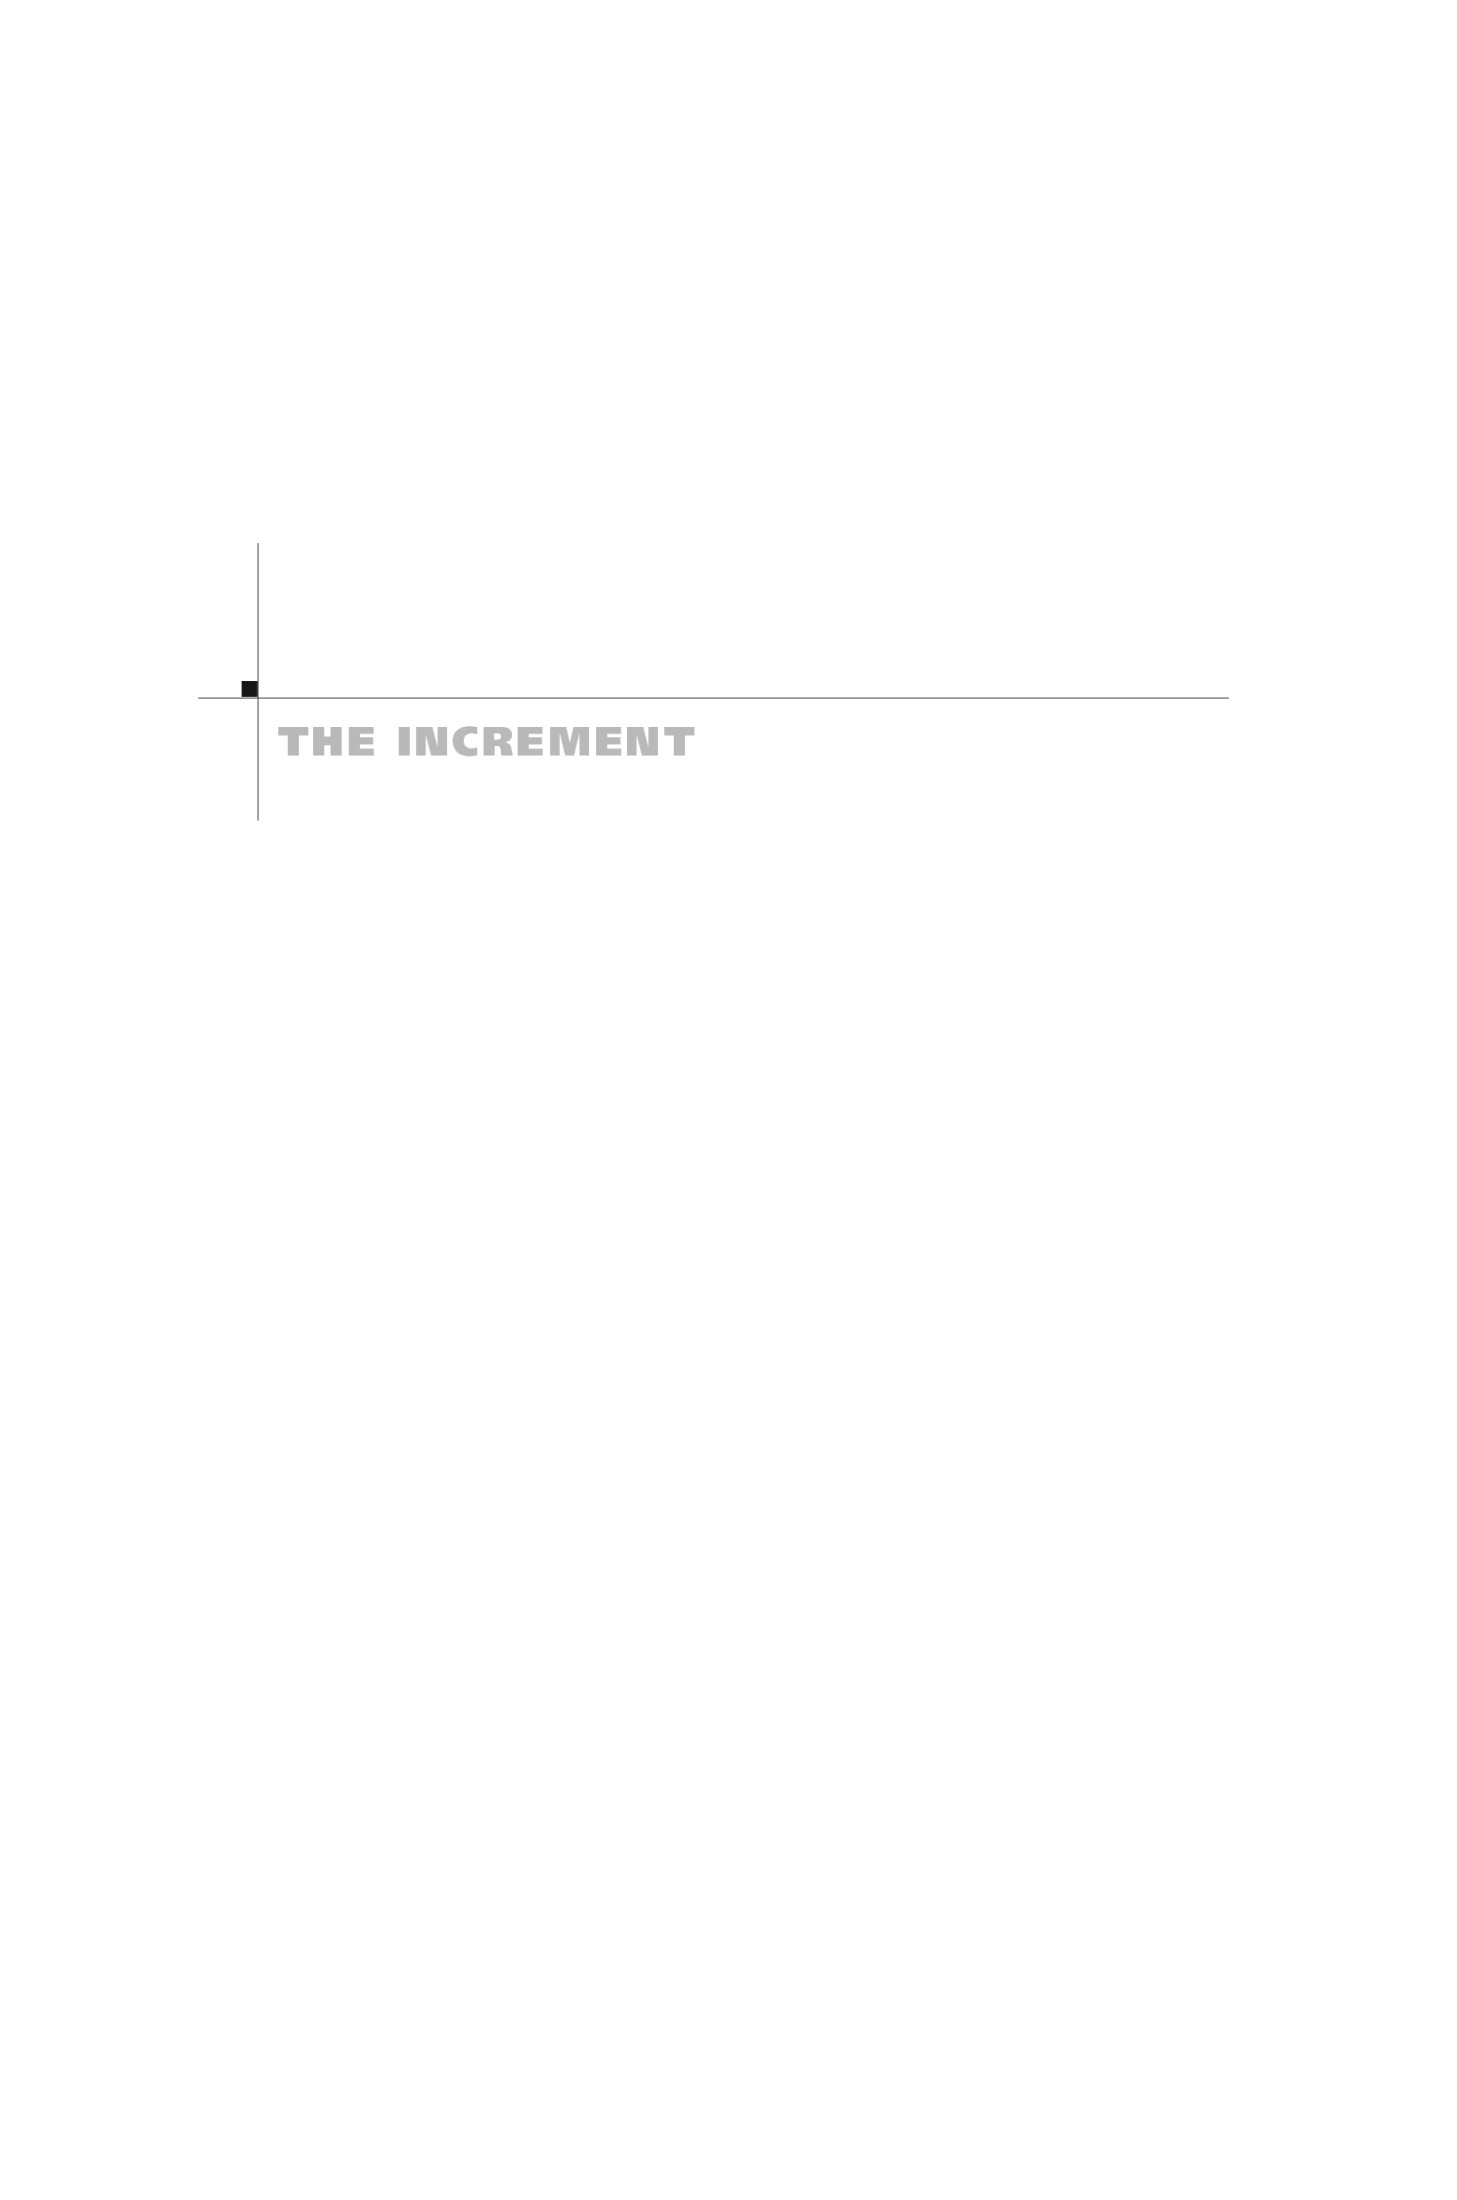 The Increment: A Novel